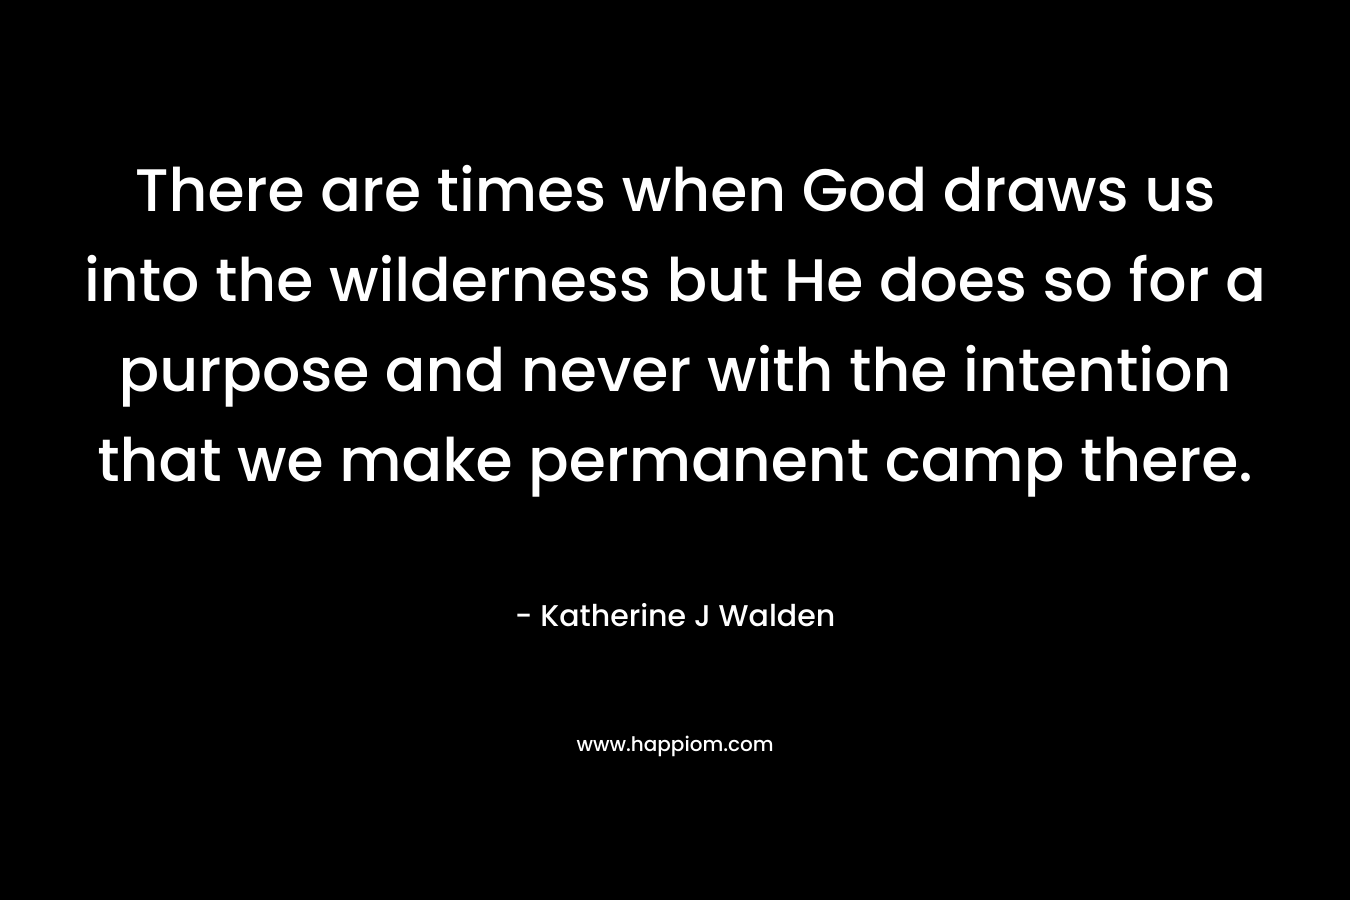 There are times when God draws us into the wilderness but He does so for a purpose and never with the intention that we make permanent camp there. – Katherine J Walden